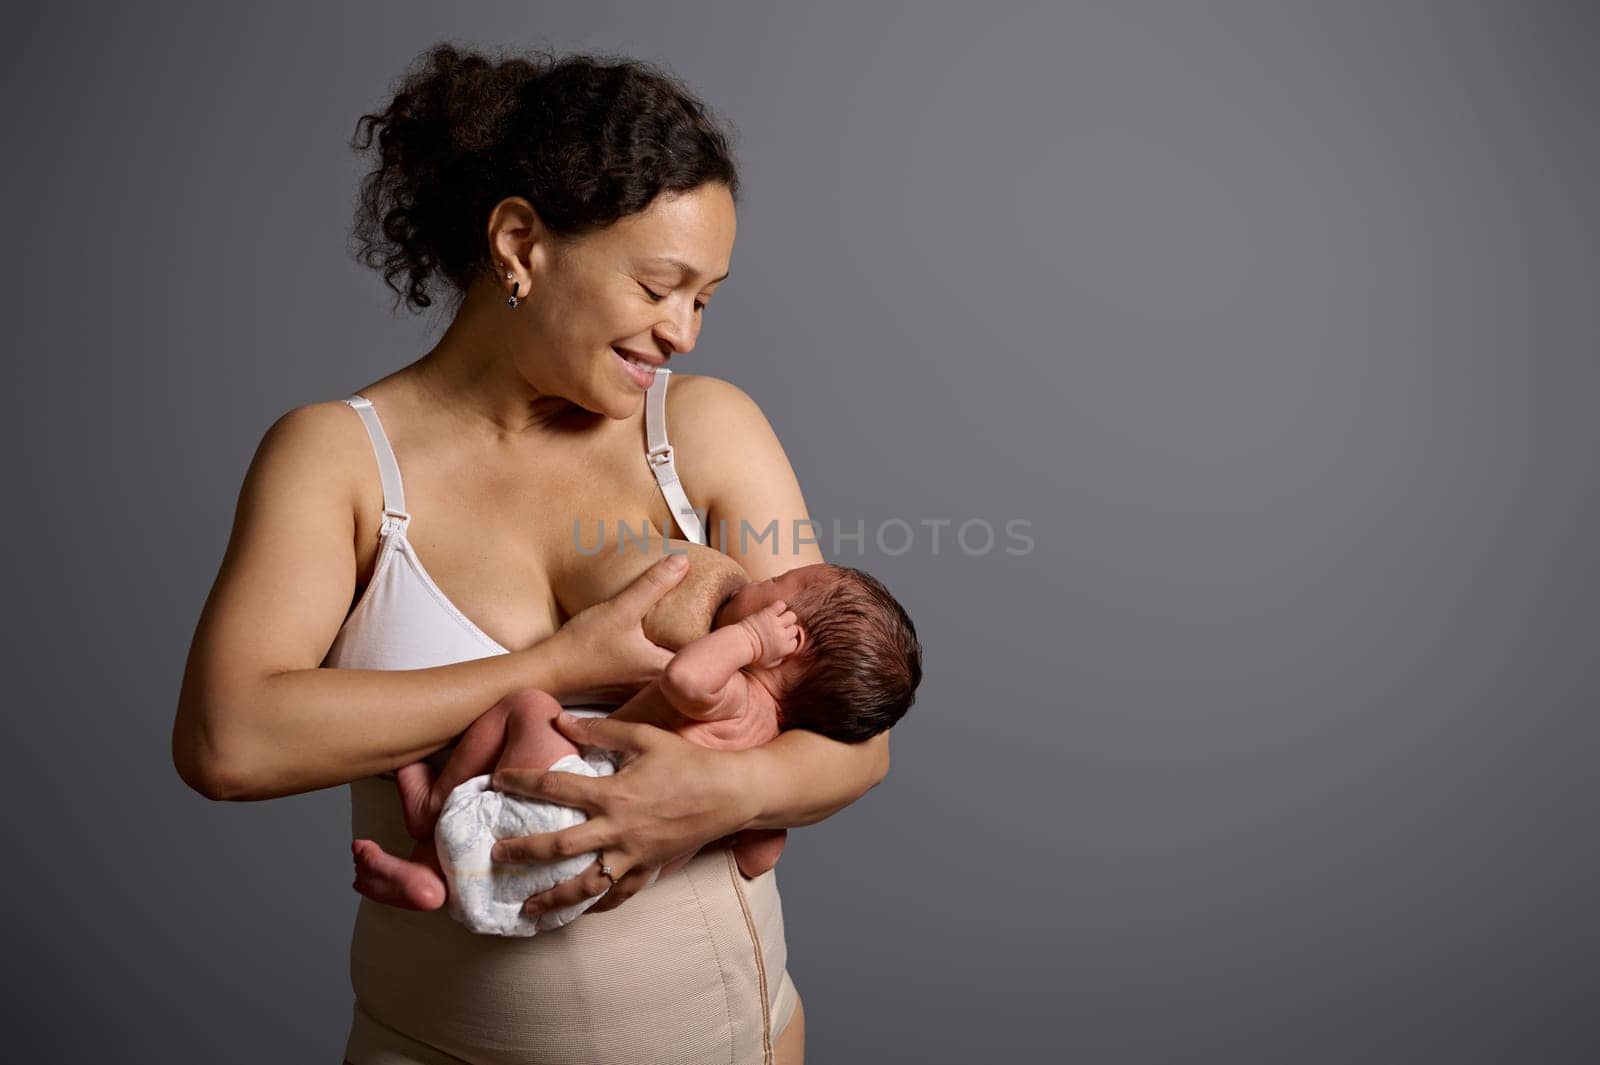 New mother feeds her newborn baby with breast milk, for healthy growth, smiling isolate on gray studio background with copy advertising space, dressed in underwear and elastic bandage after c-section